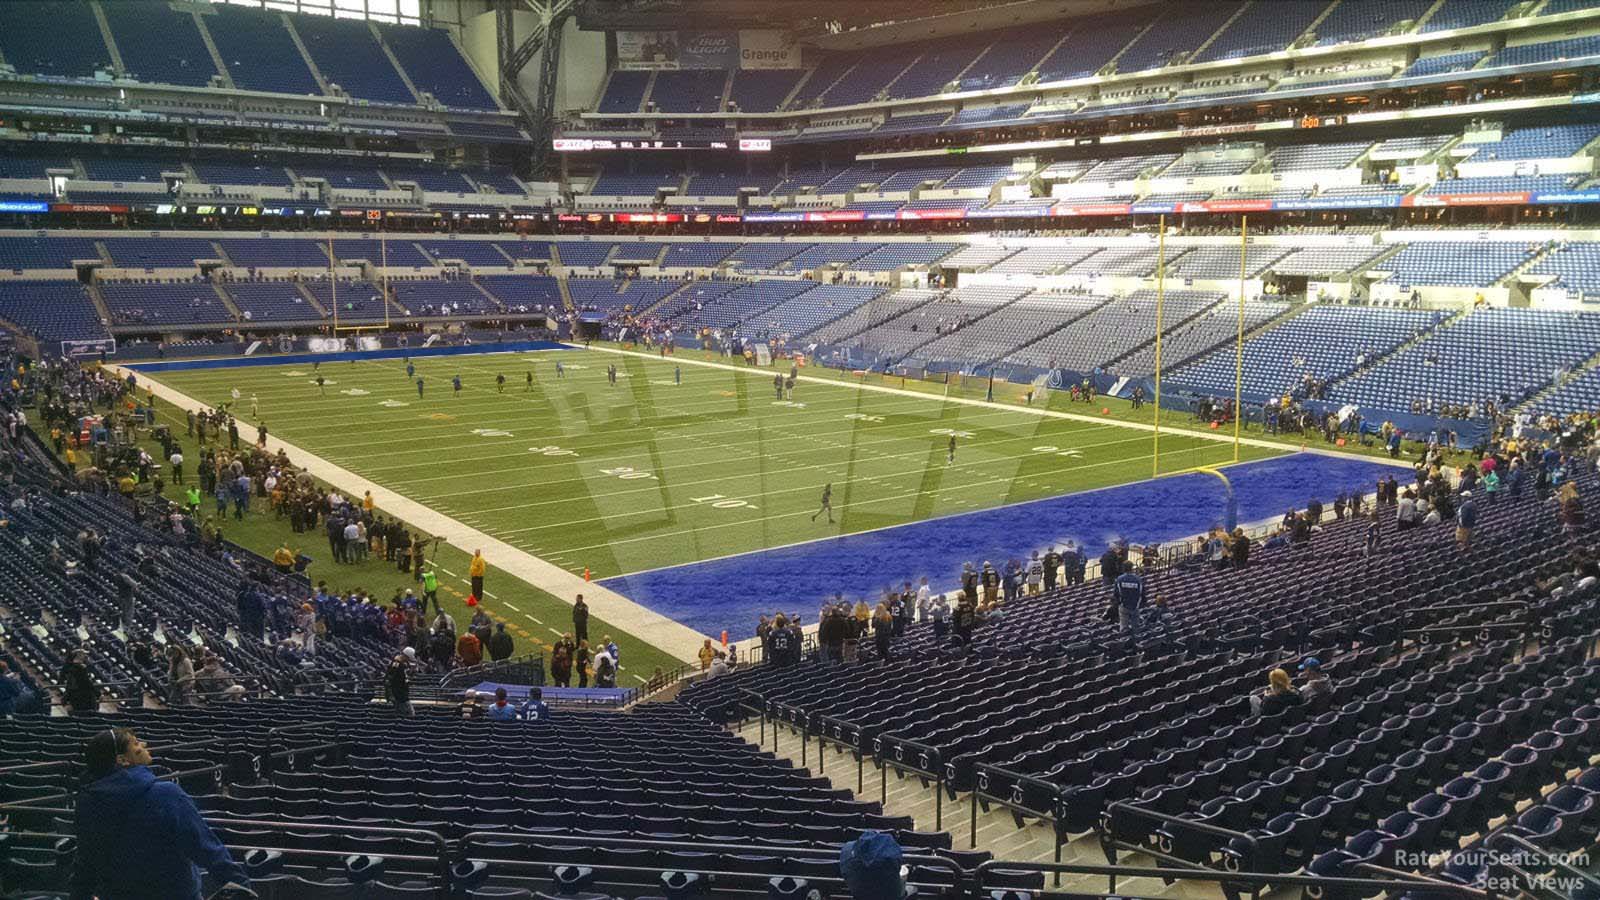 section 204, row 1 seat view  for football - lucas oil stadium